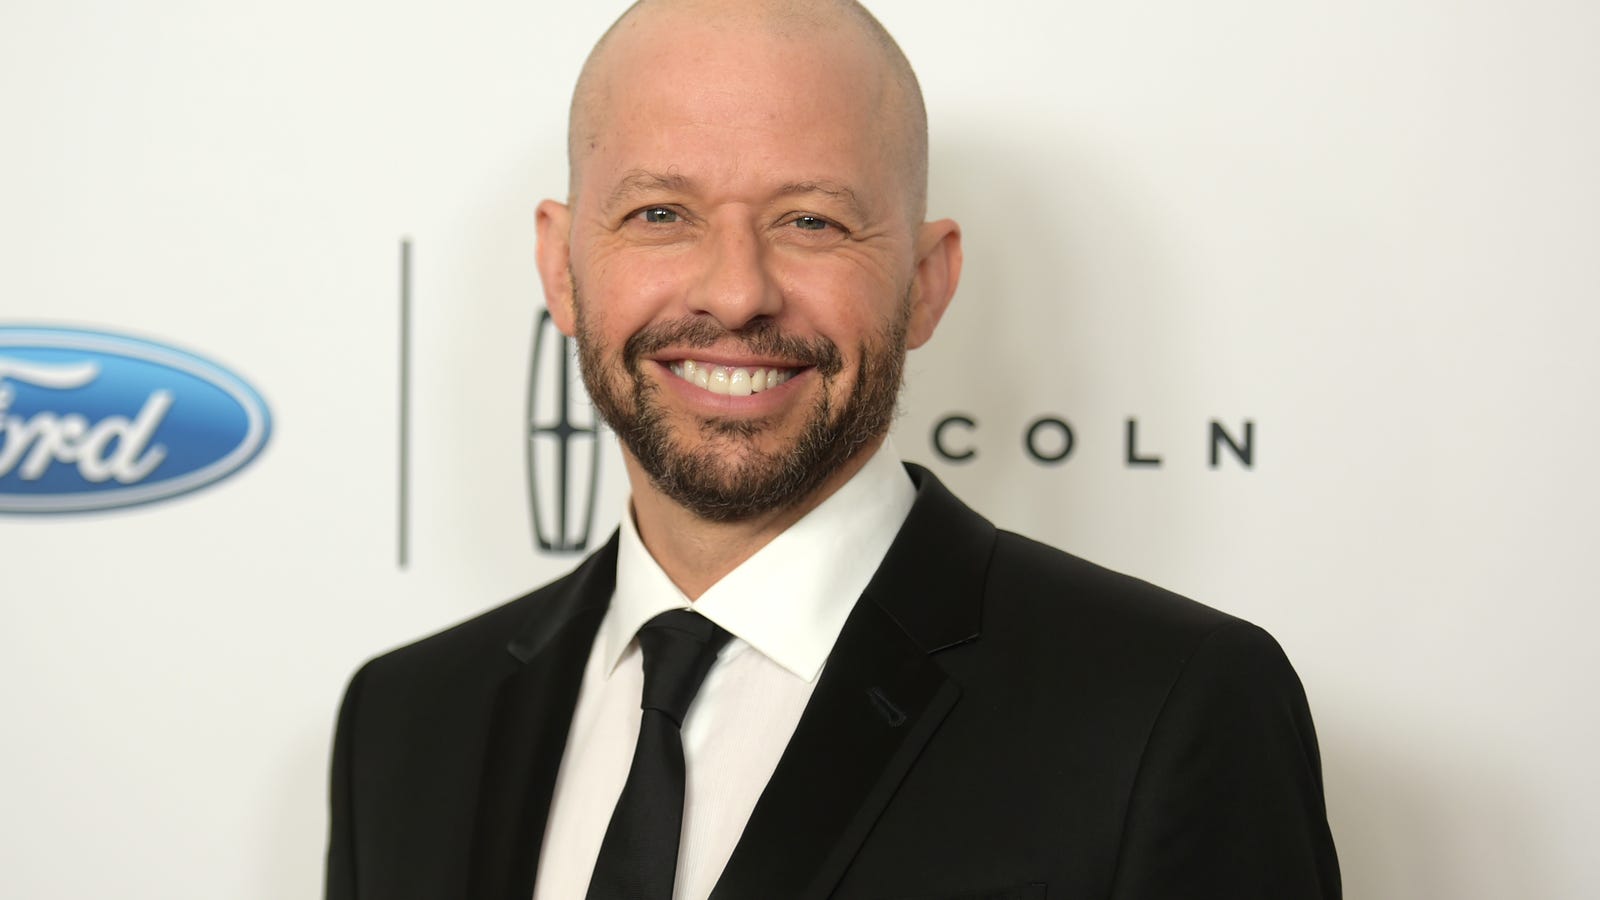 Supergirl's Lex Luthor Is Jon Cryer, But How Old Is He?